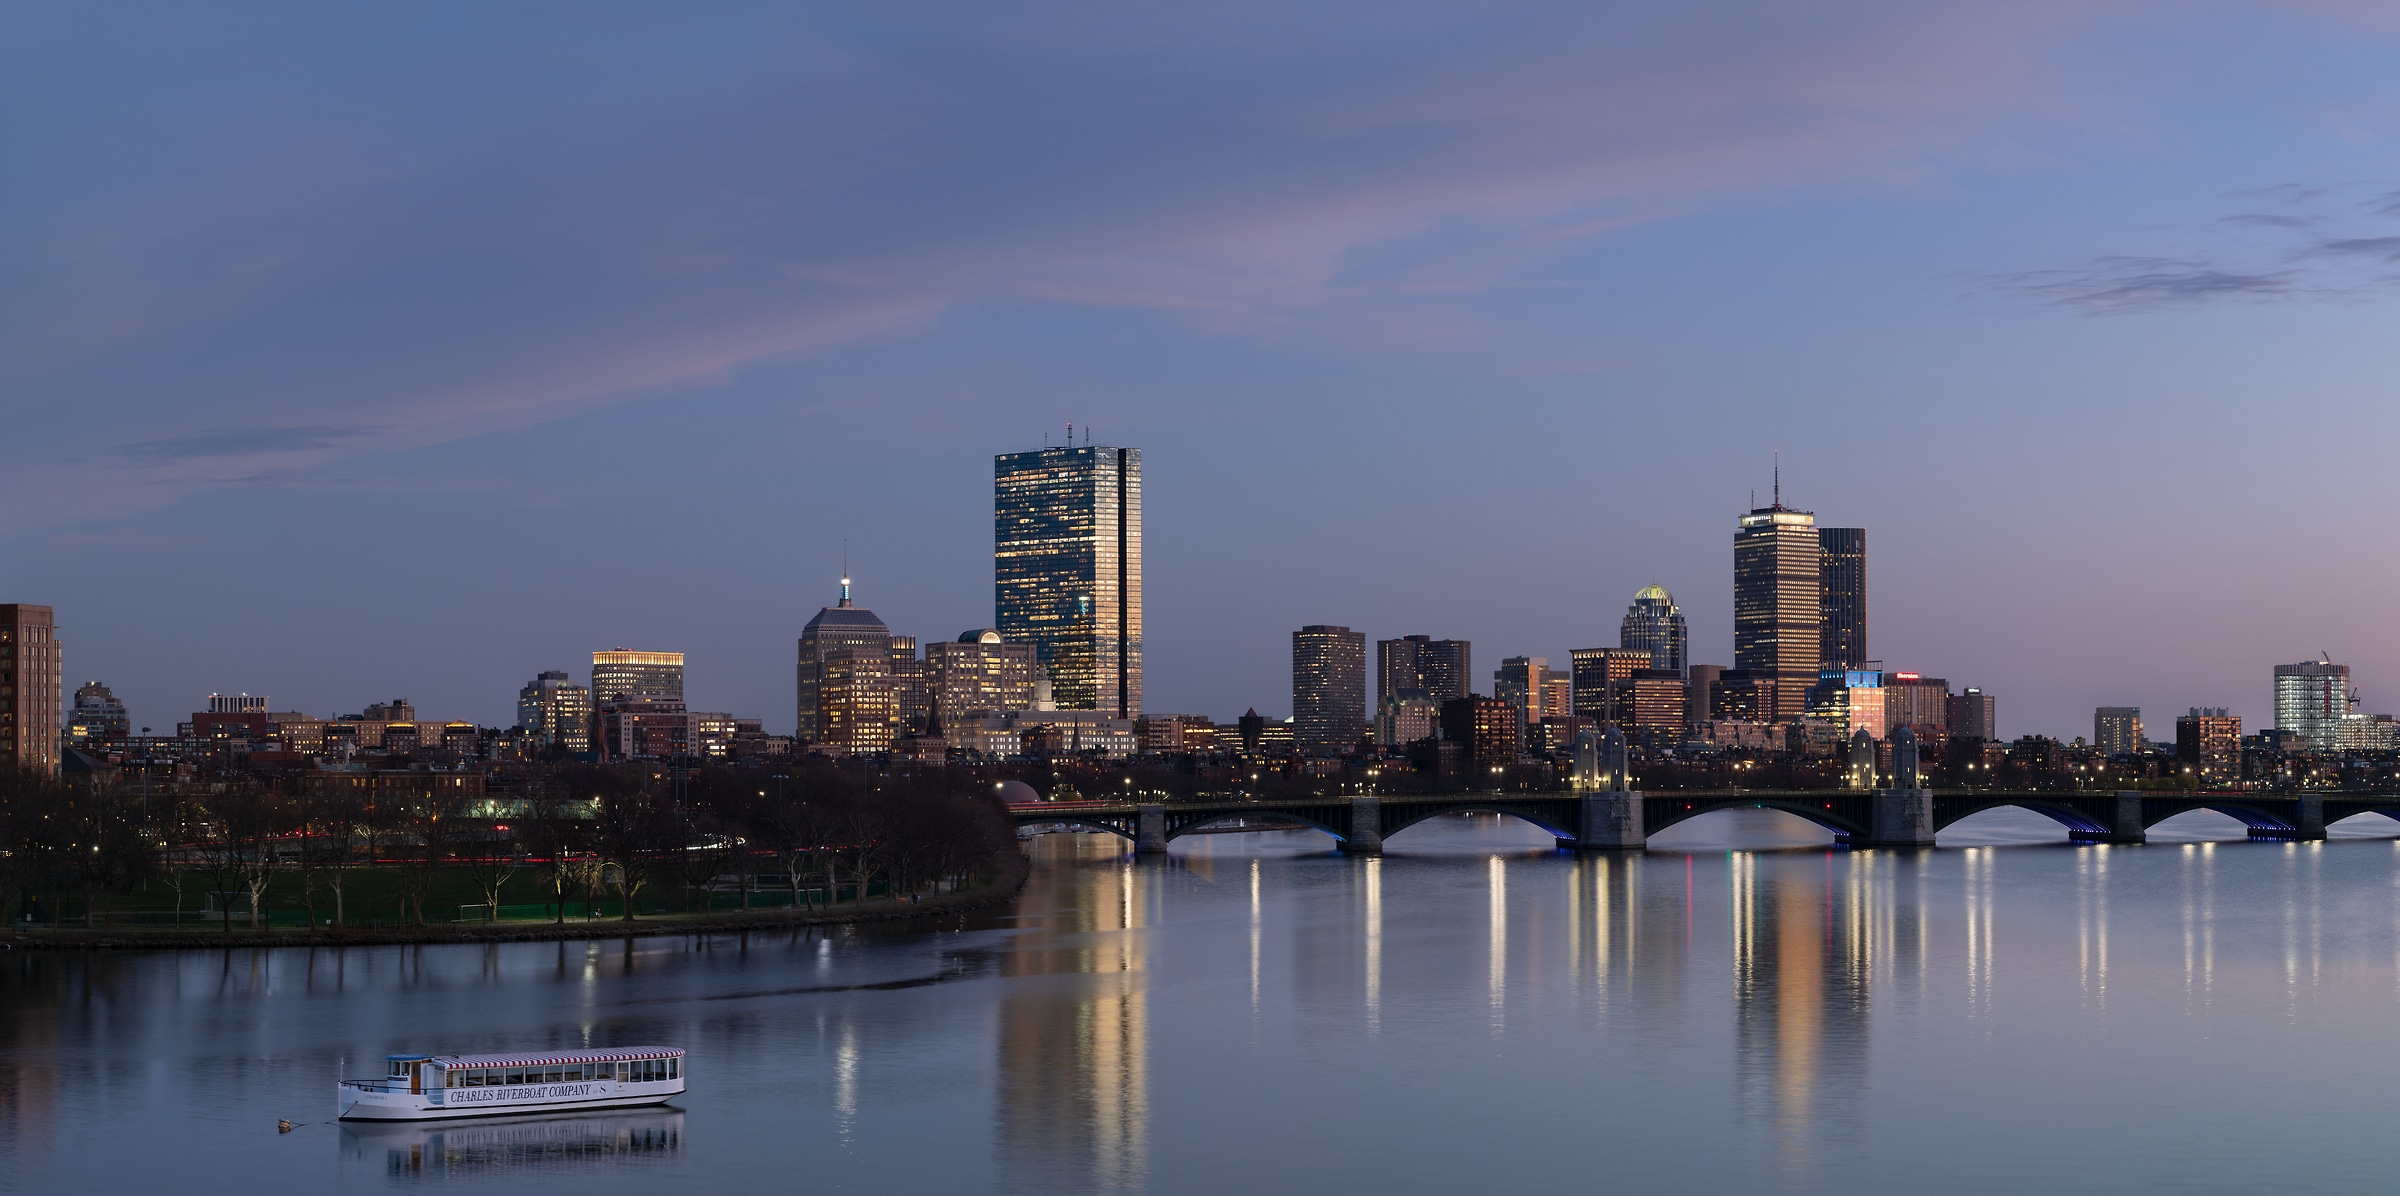 409 megapixels! A very high resolution, large-format VAST photo print of Back Bay and the Charles River with the Boston skyline at dusk; skyline photograph created by Greg Probst in Boston, Massachusetts.